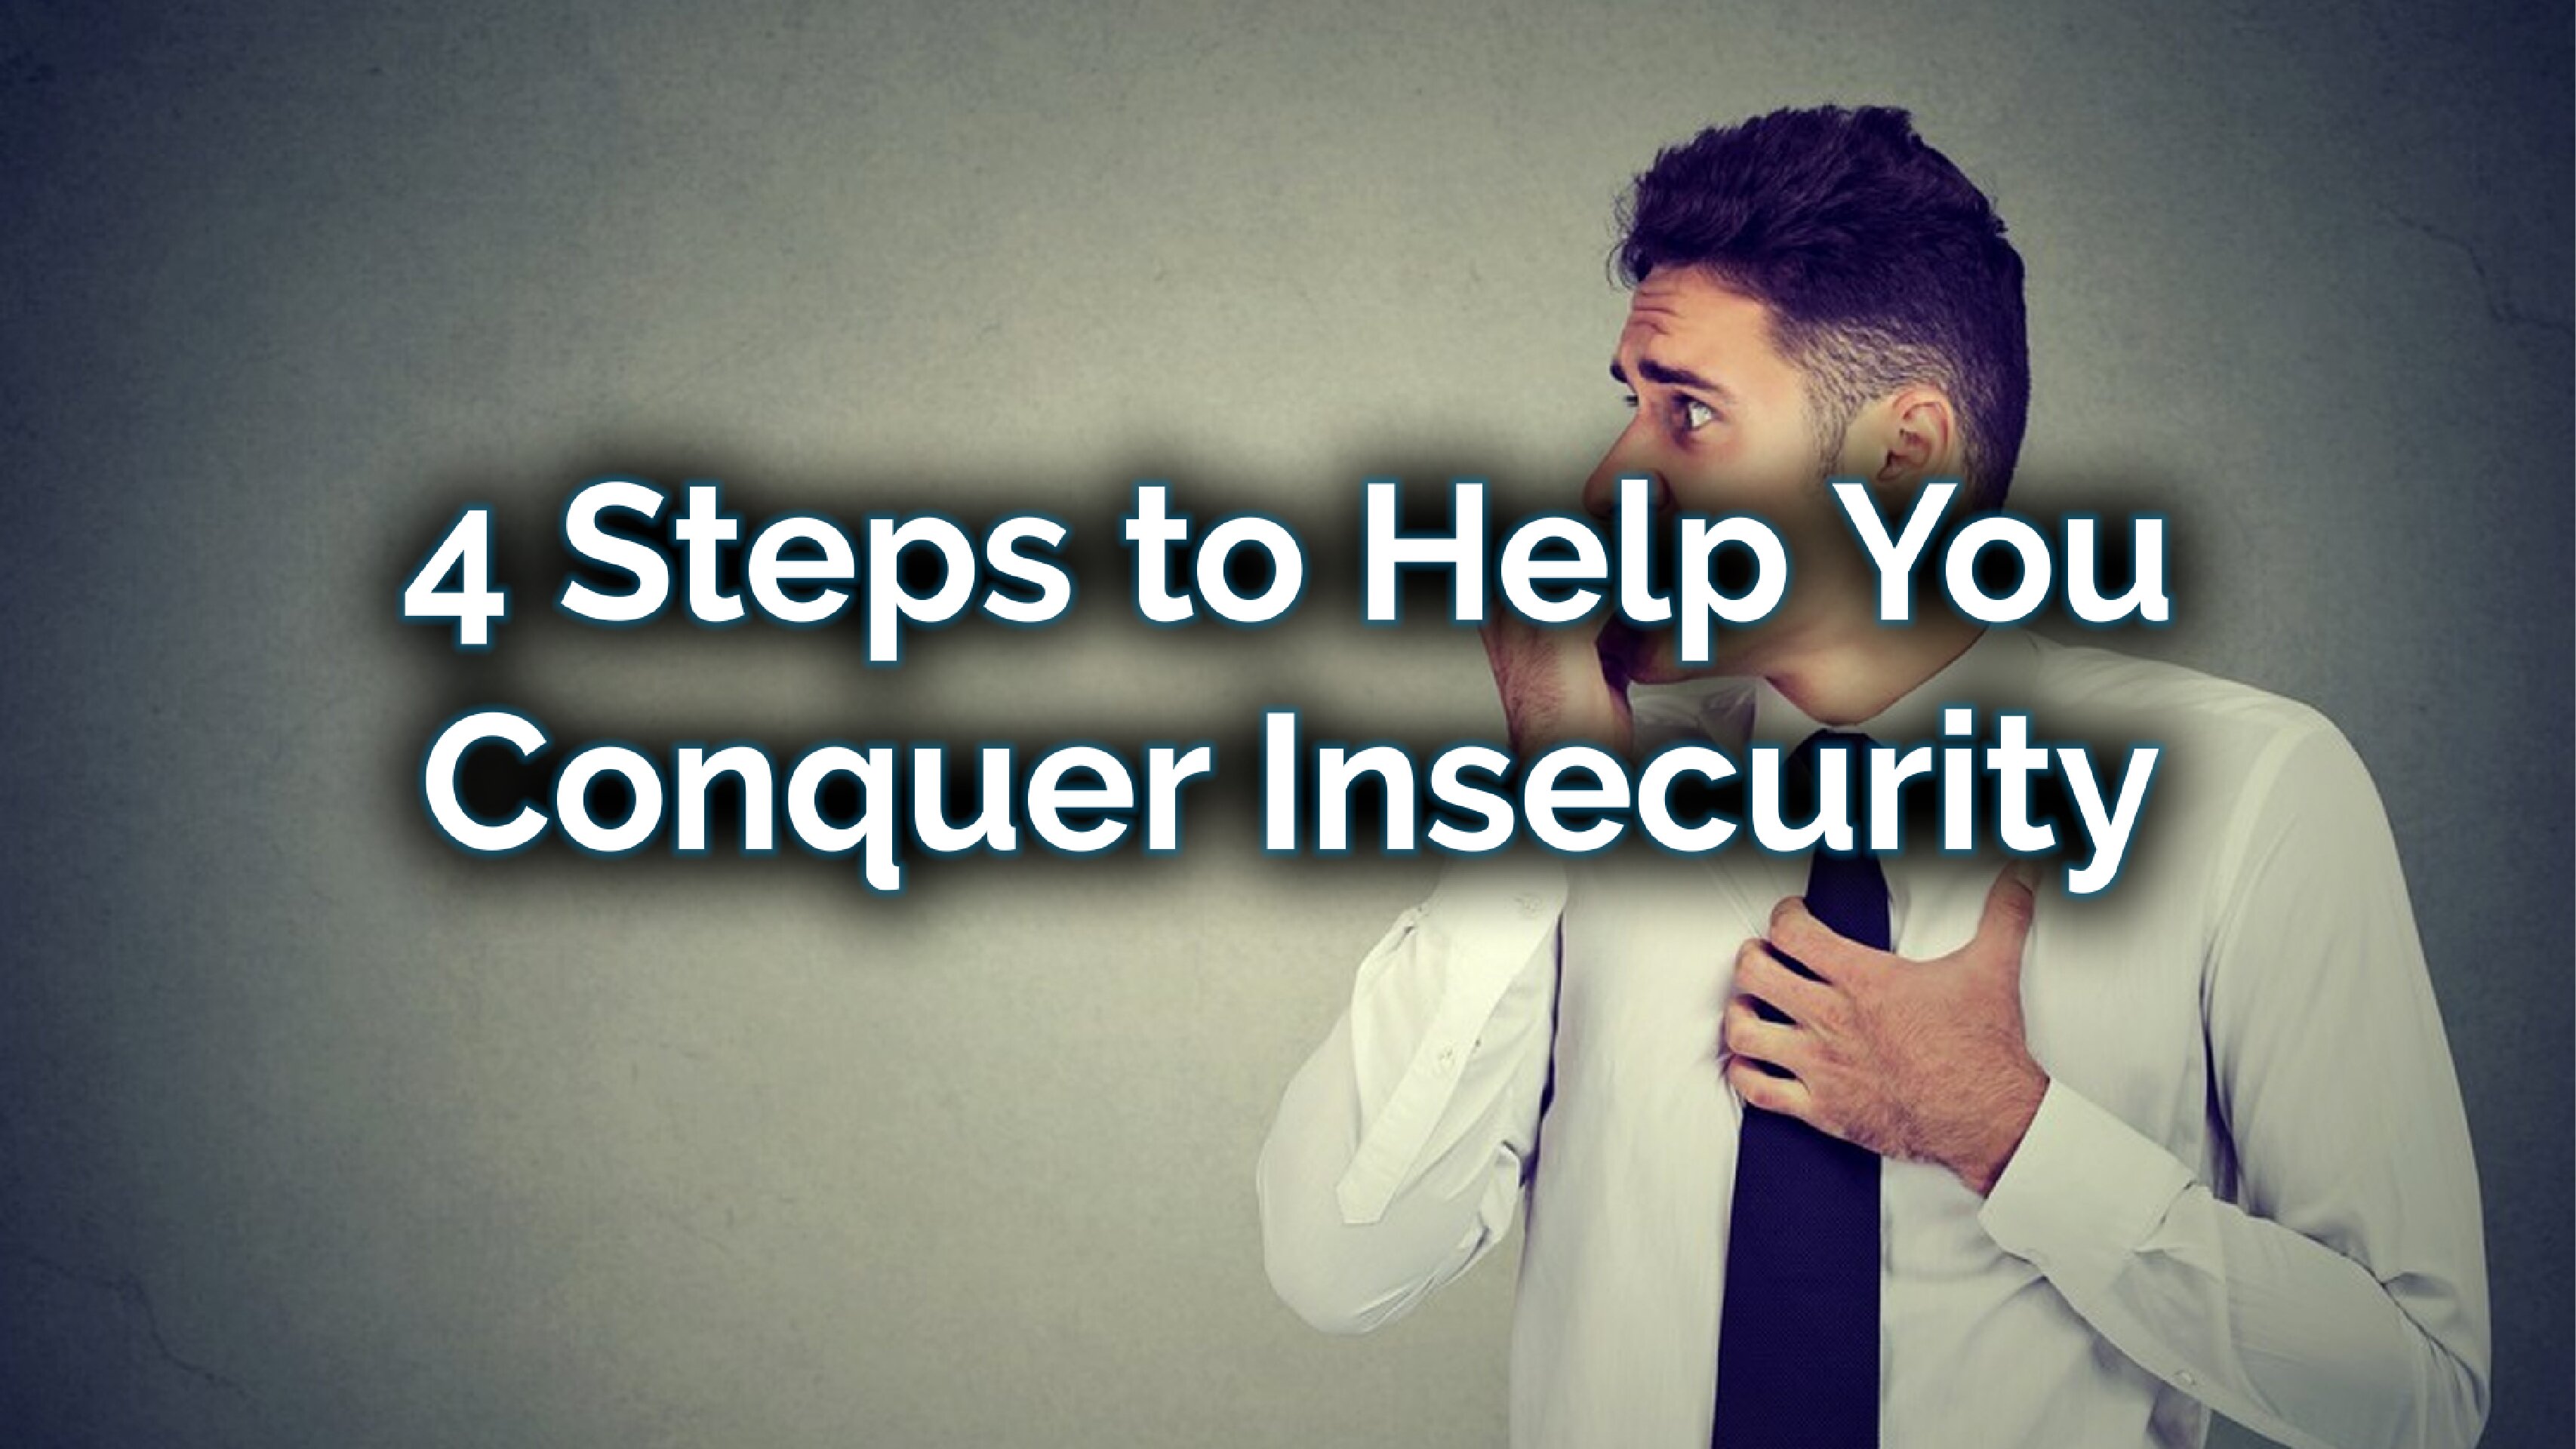 4 Steps to Help You Conquer Insecurity.